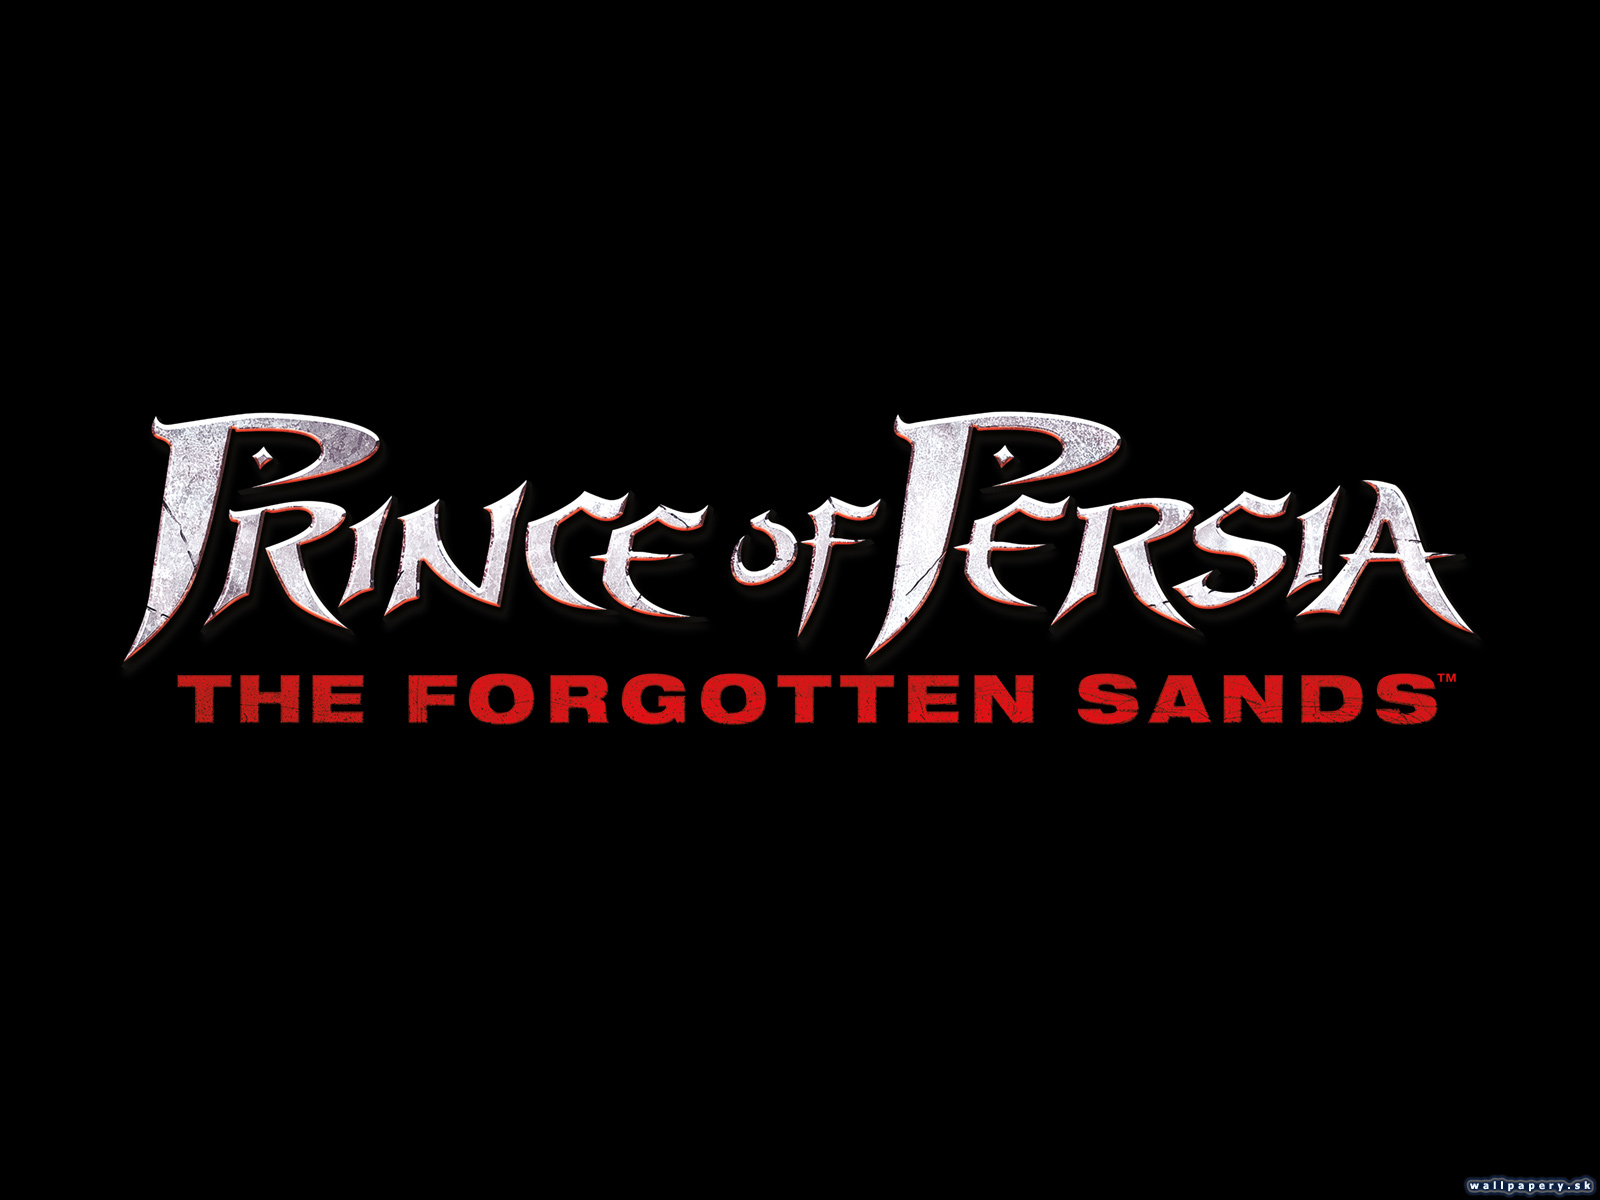 Prince of Persia: The Forgotten Sands - wallpaper 10